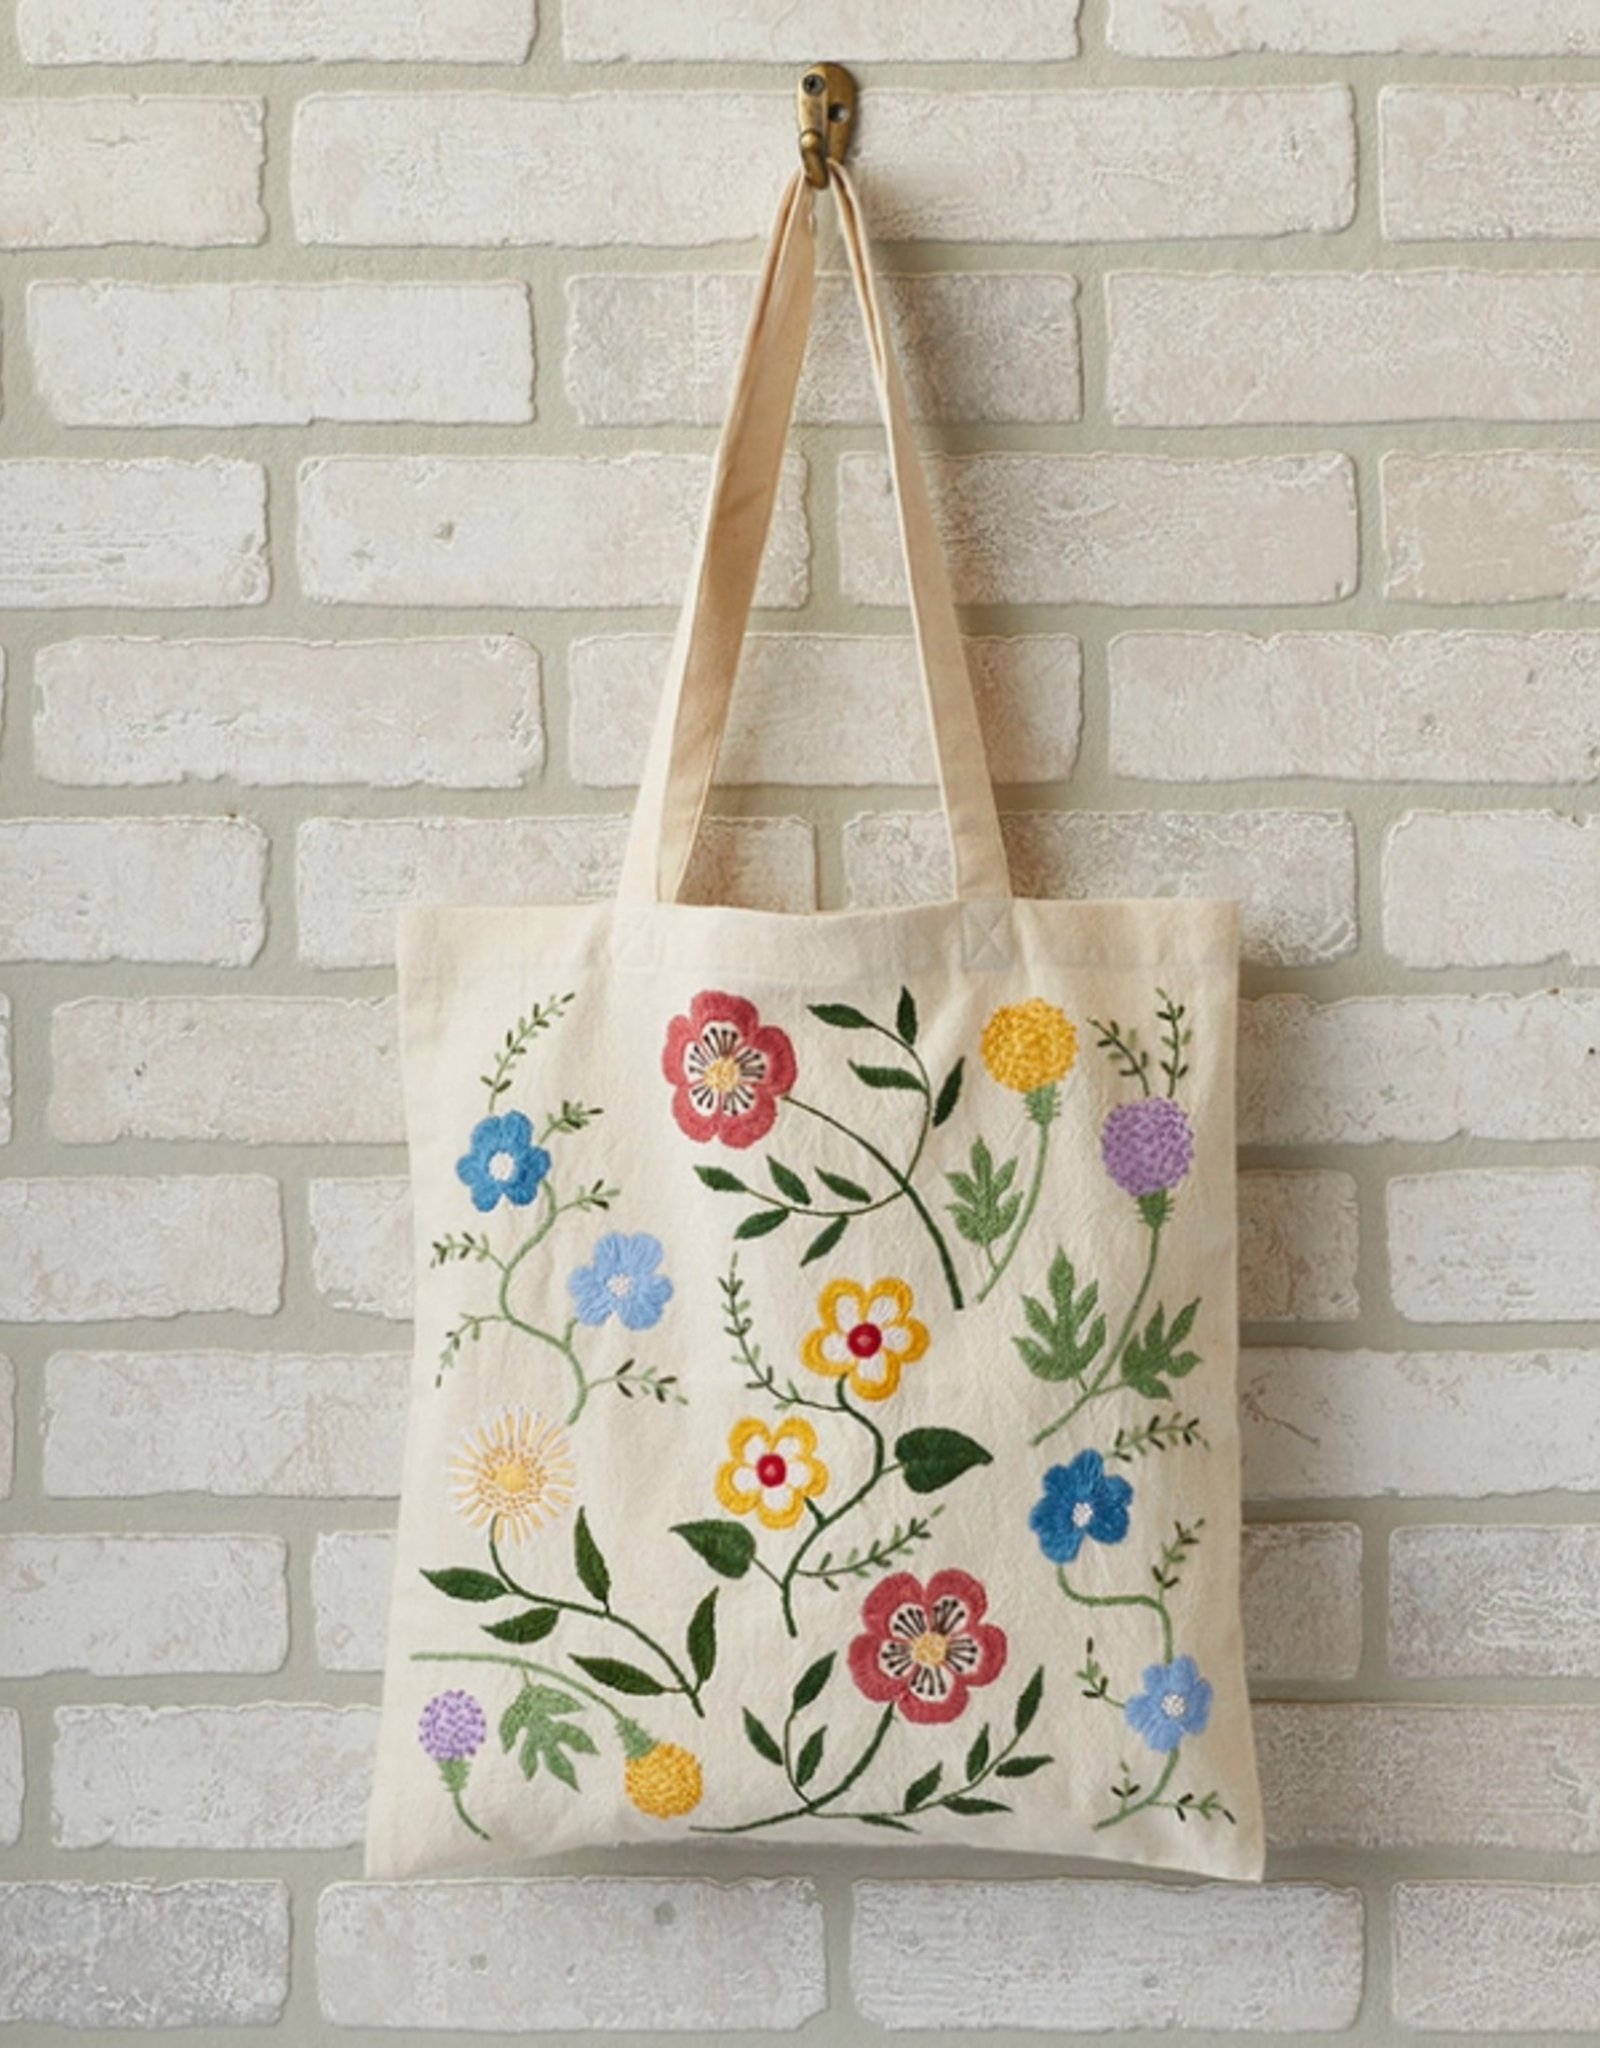 Serrv Wildflower Embroidered Tote Bag